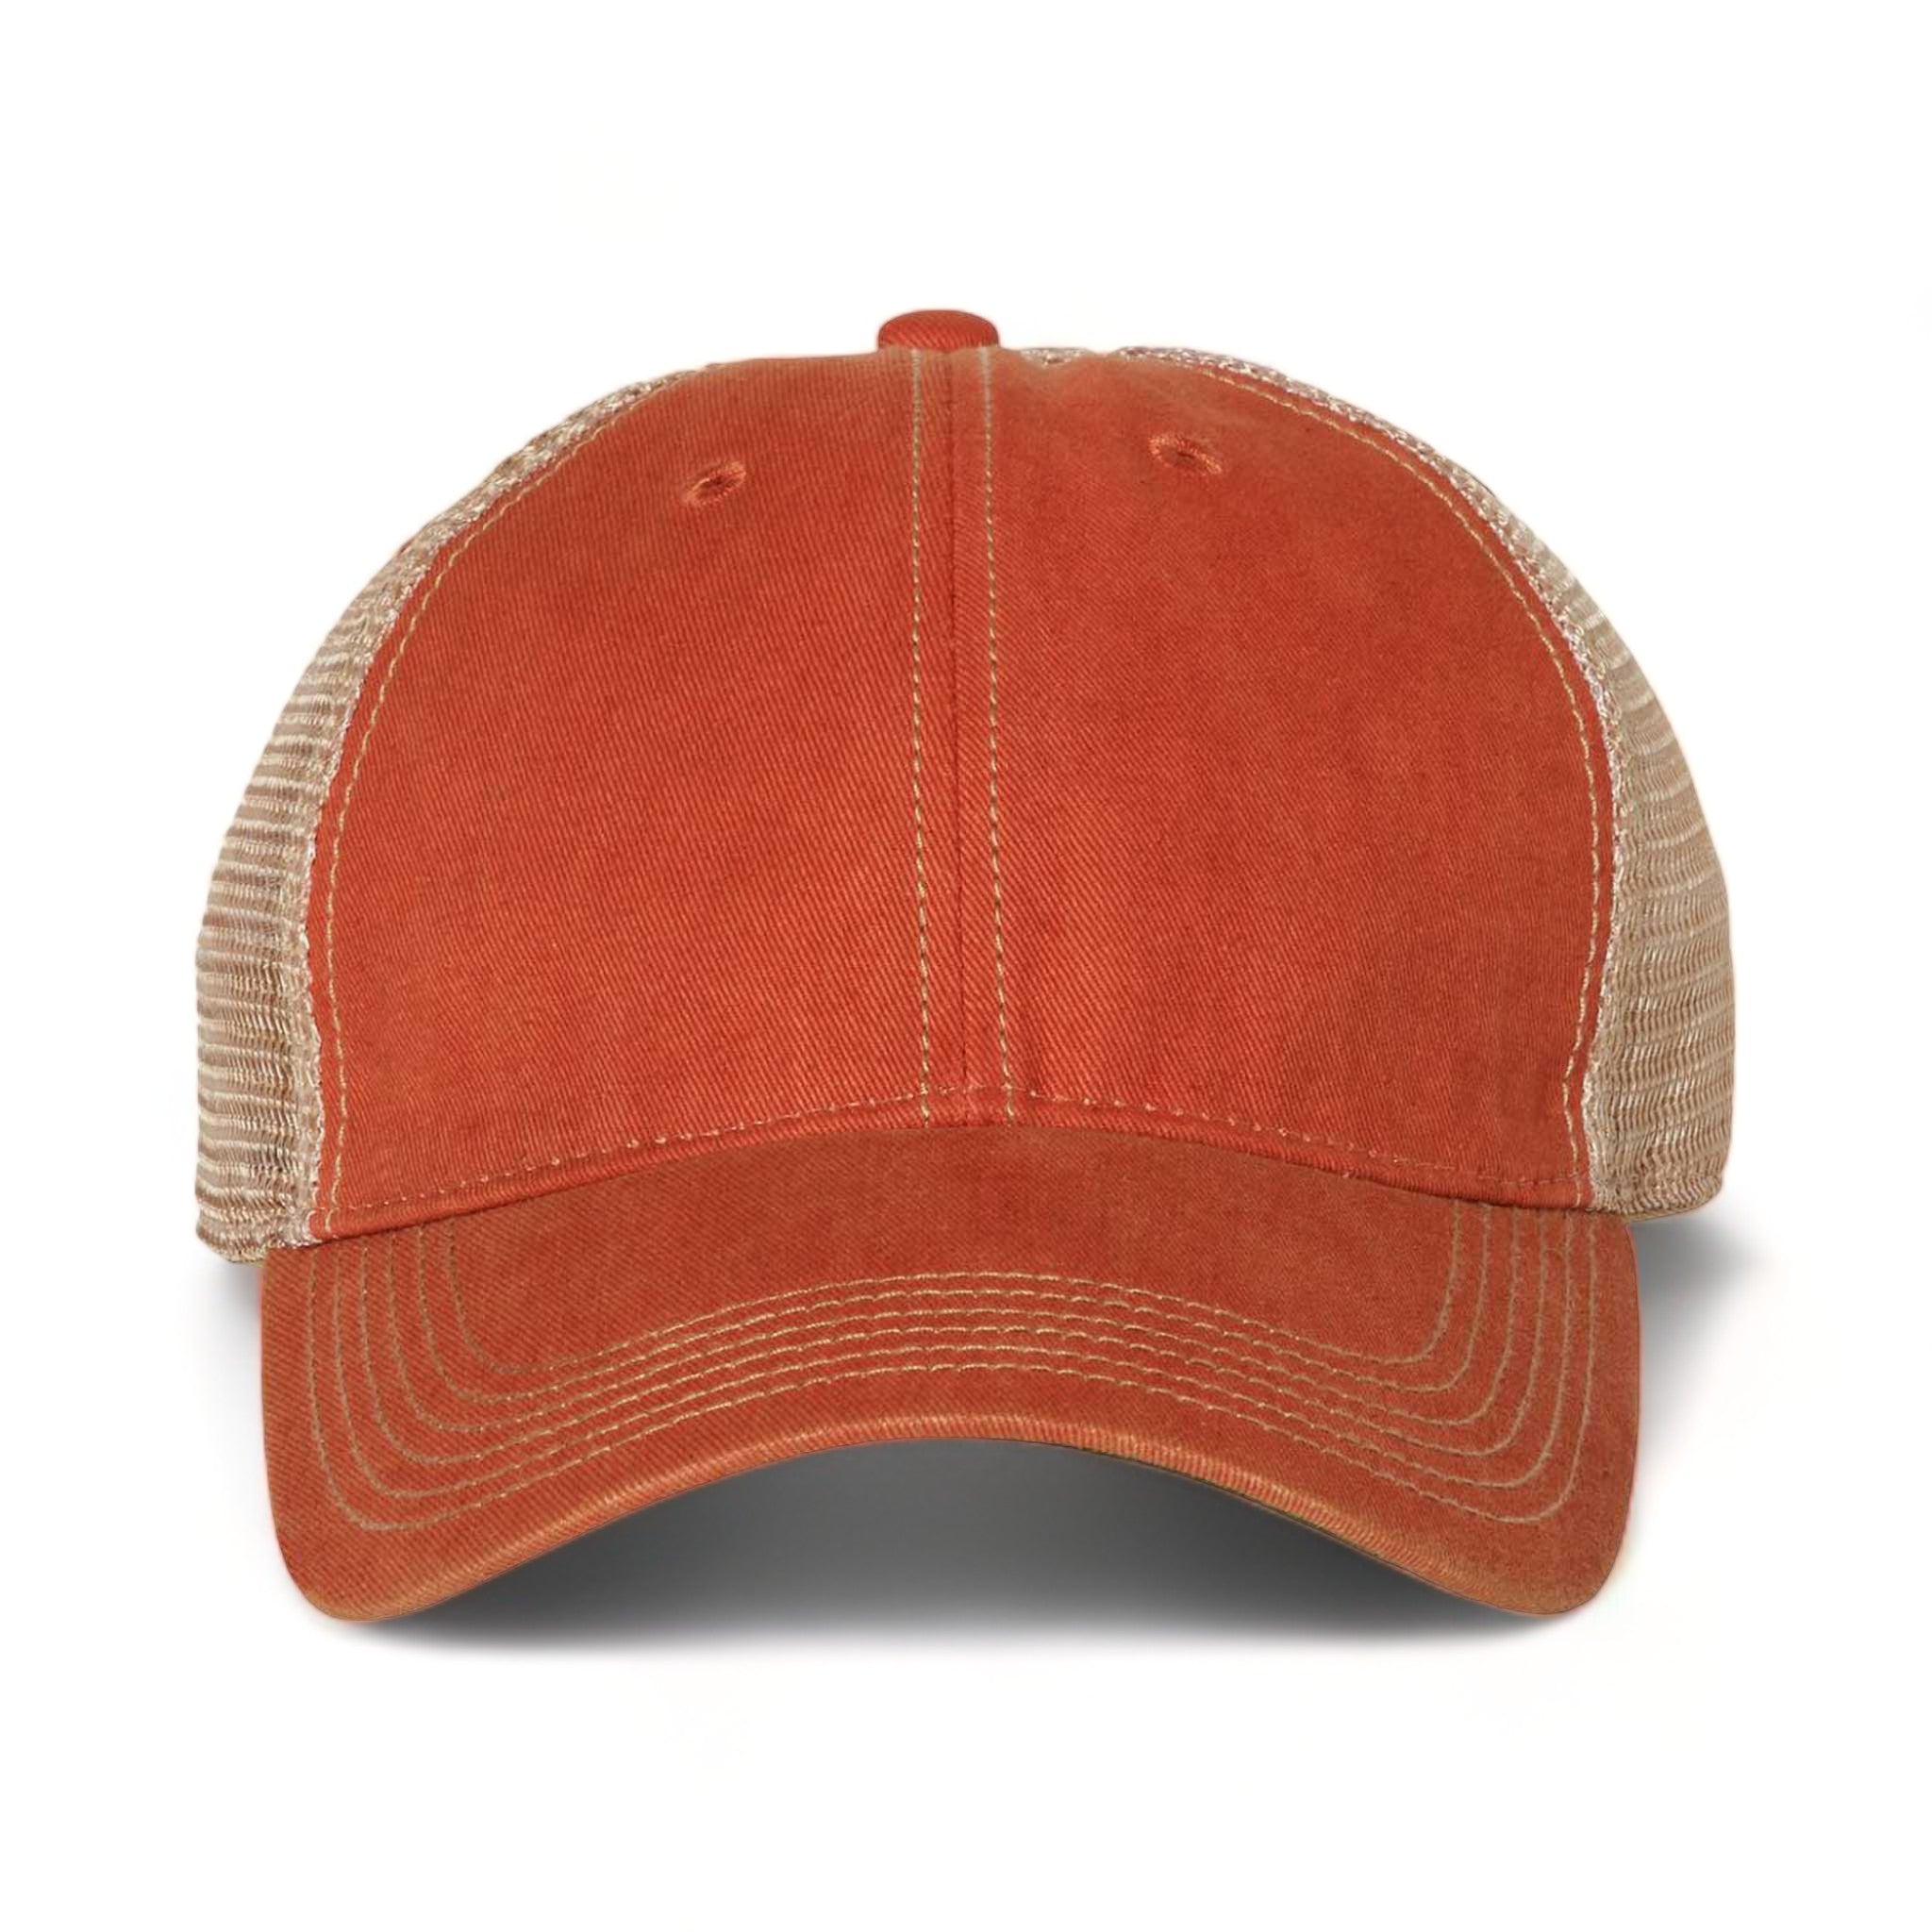 Front view of LEGACY OFA custom hat in orange and khaki